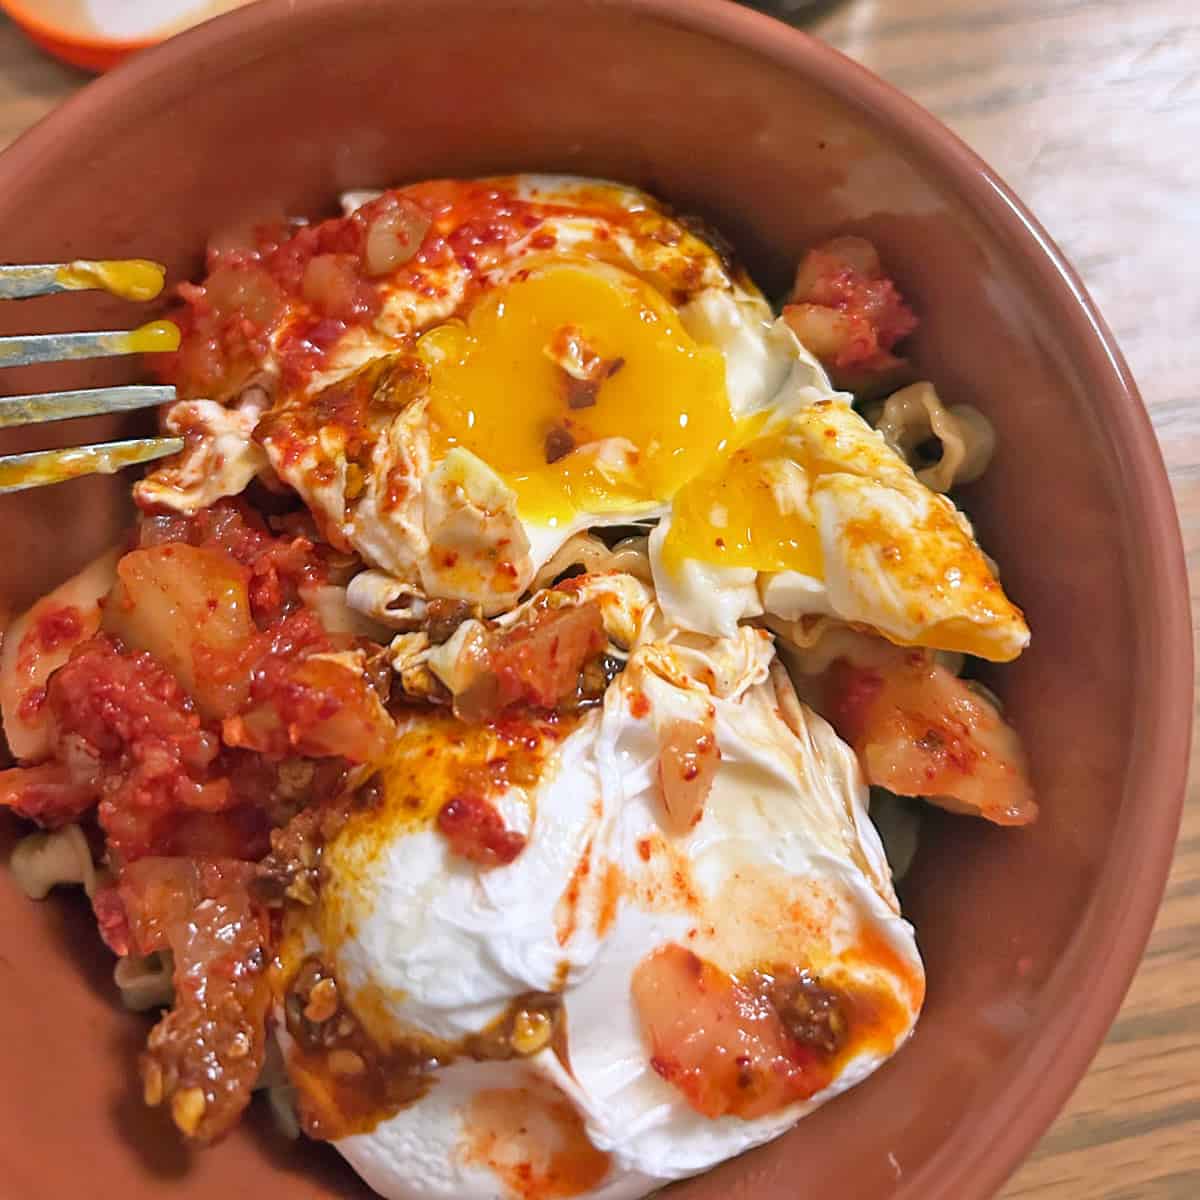 A meal topped with poached eggs.